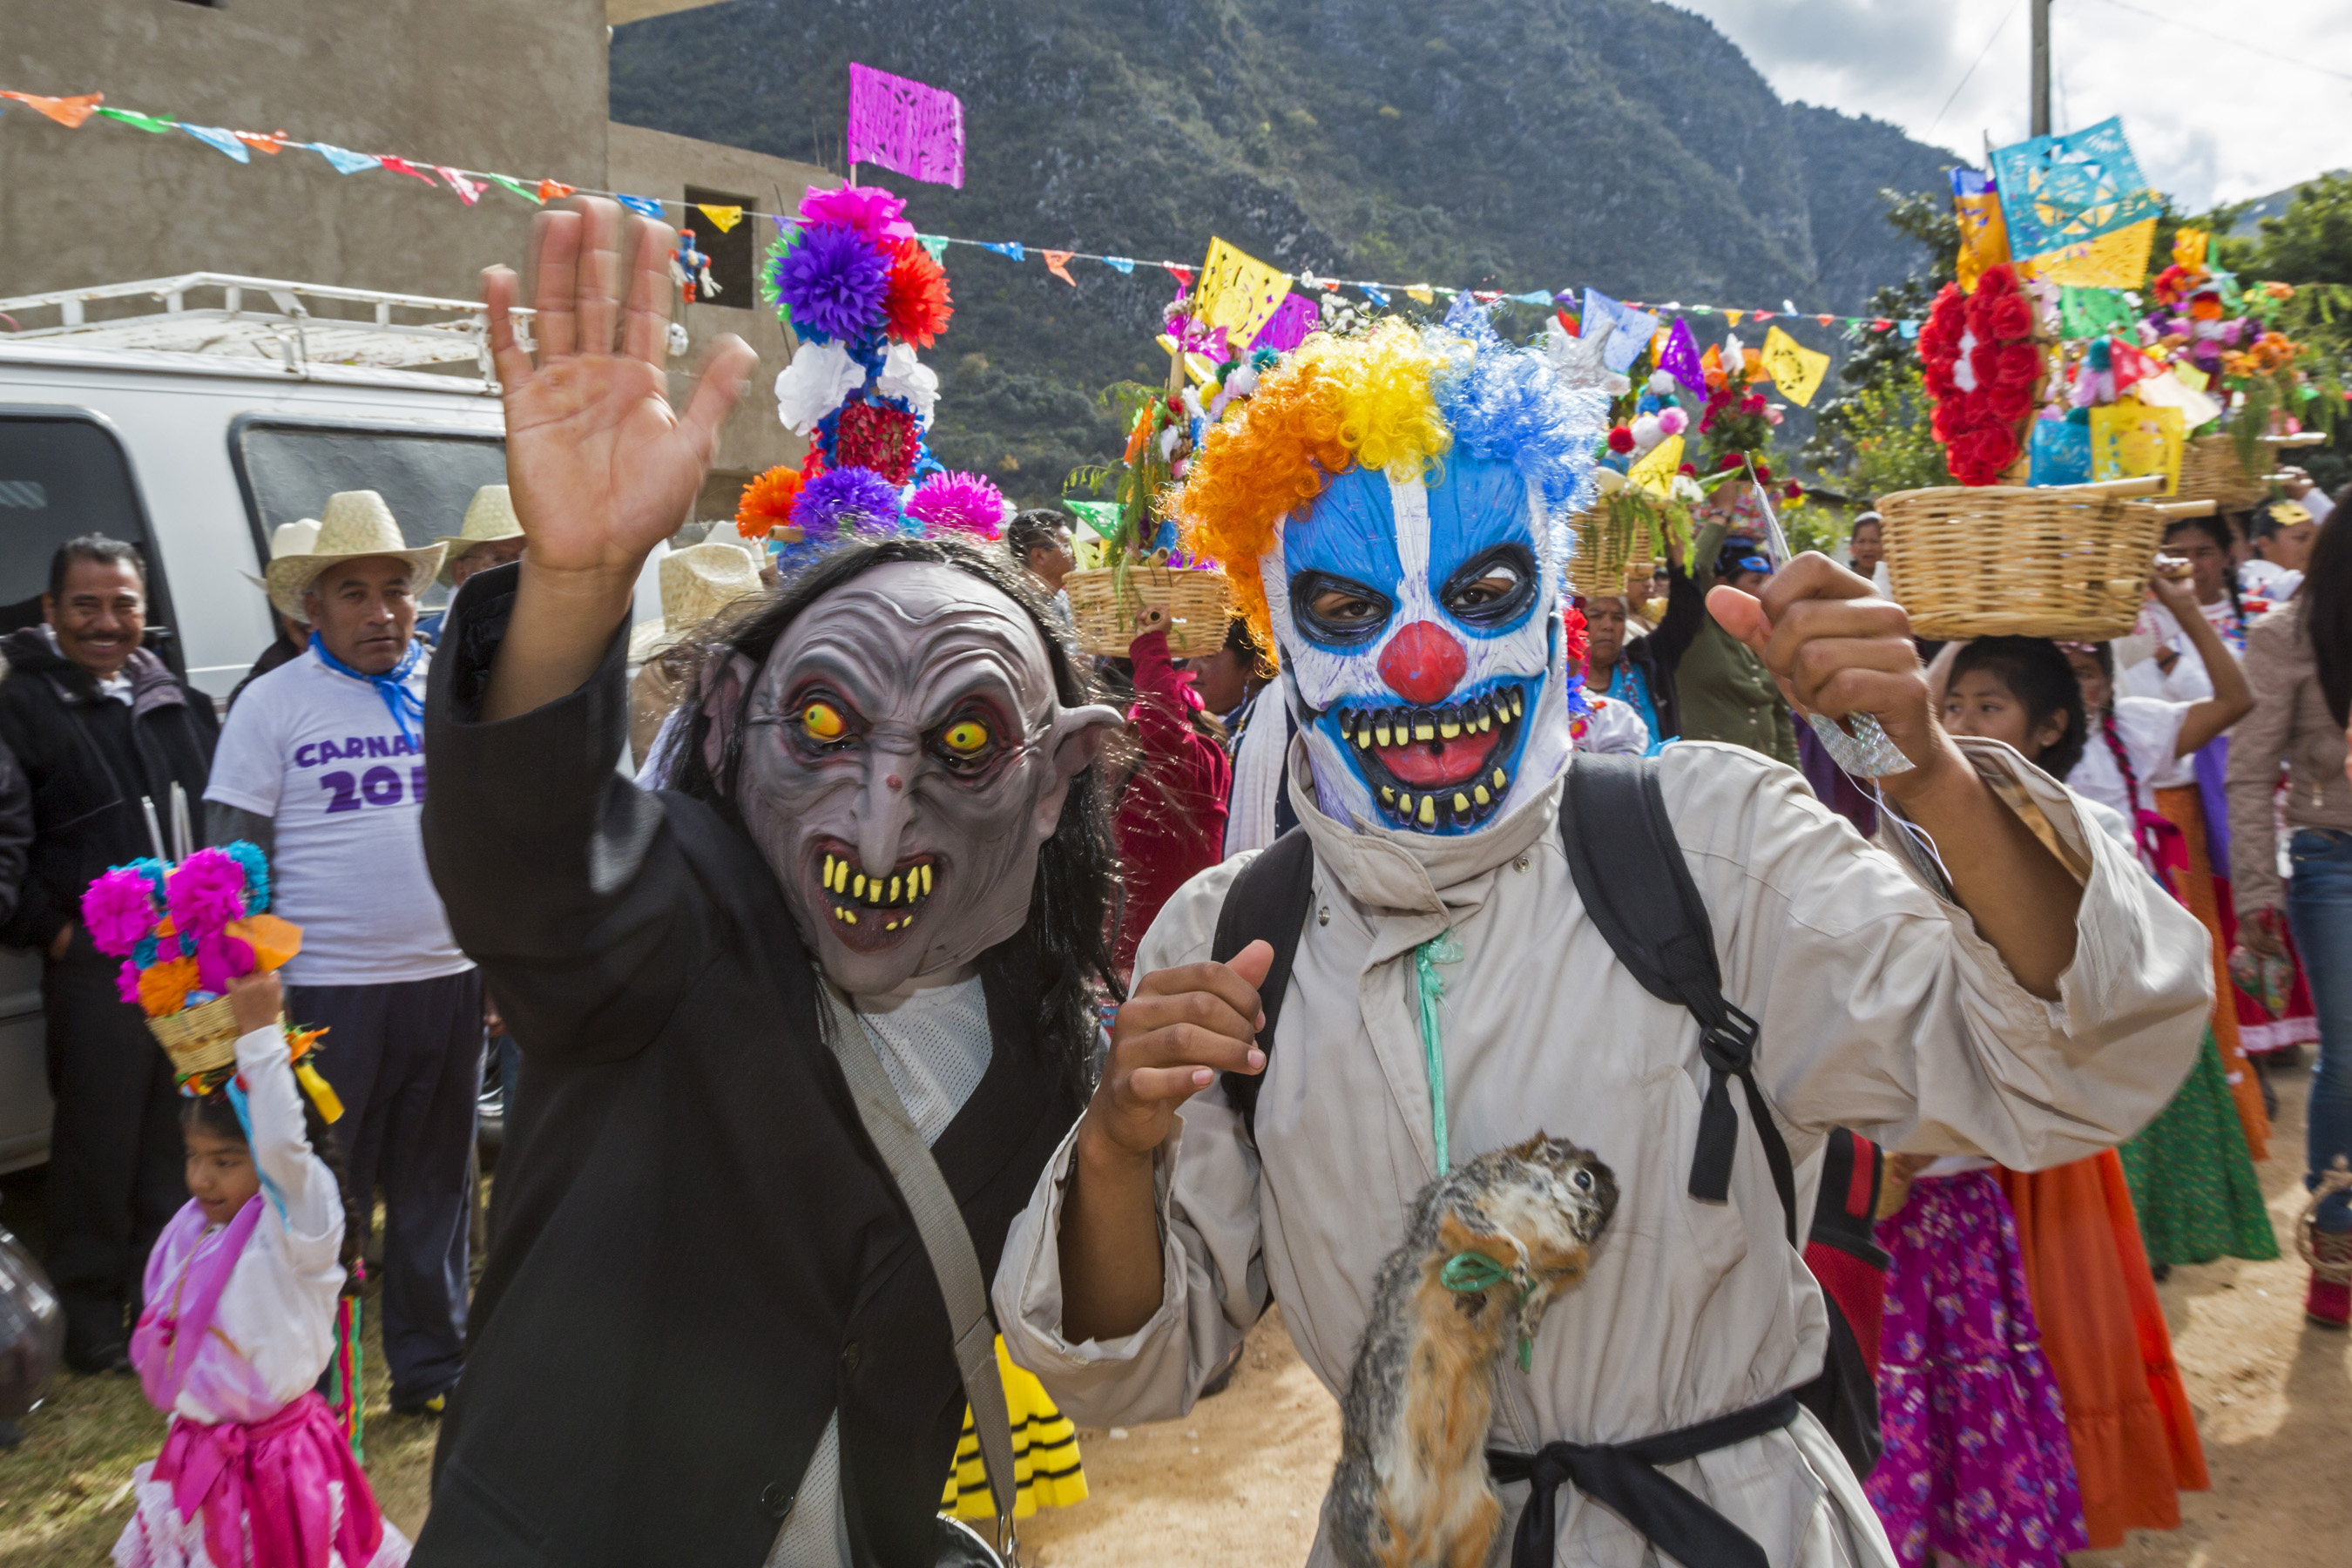 Residents of a small Mixtec mountain town participate in their annual pre-Lenten Carnival celebration Feb. 6 in Oaxaca, Mexico. (CNS photo/Jim West)